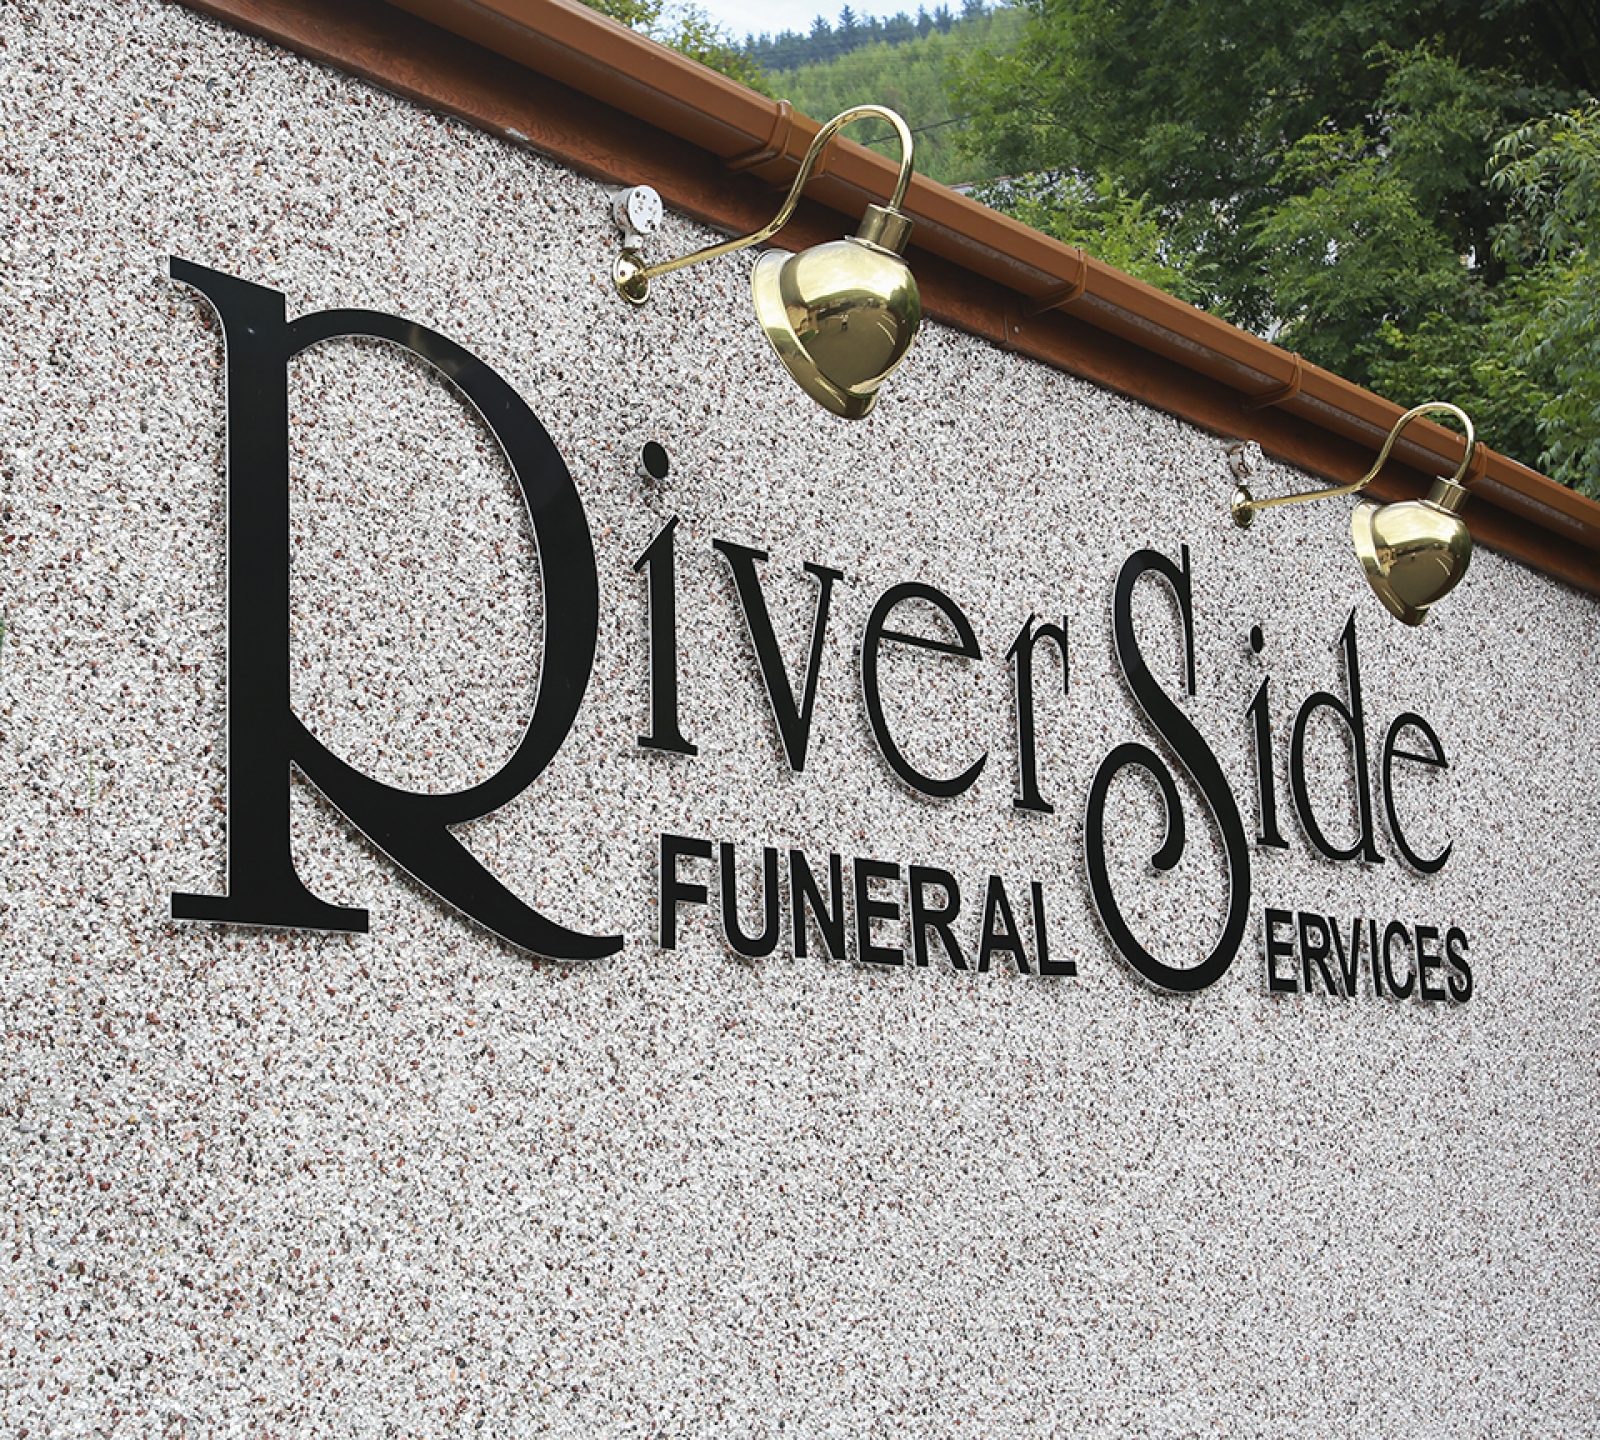 Riverside Funeral Services